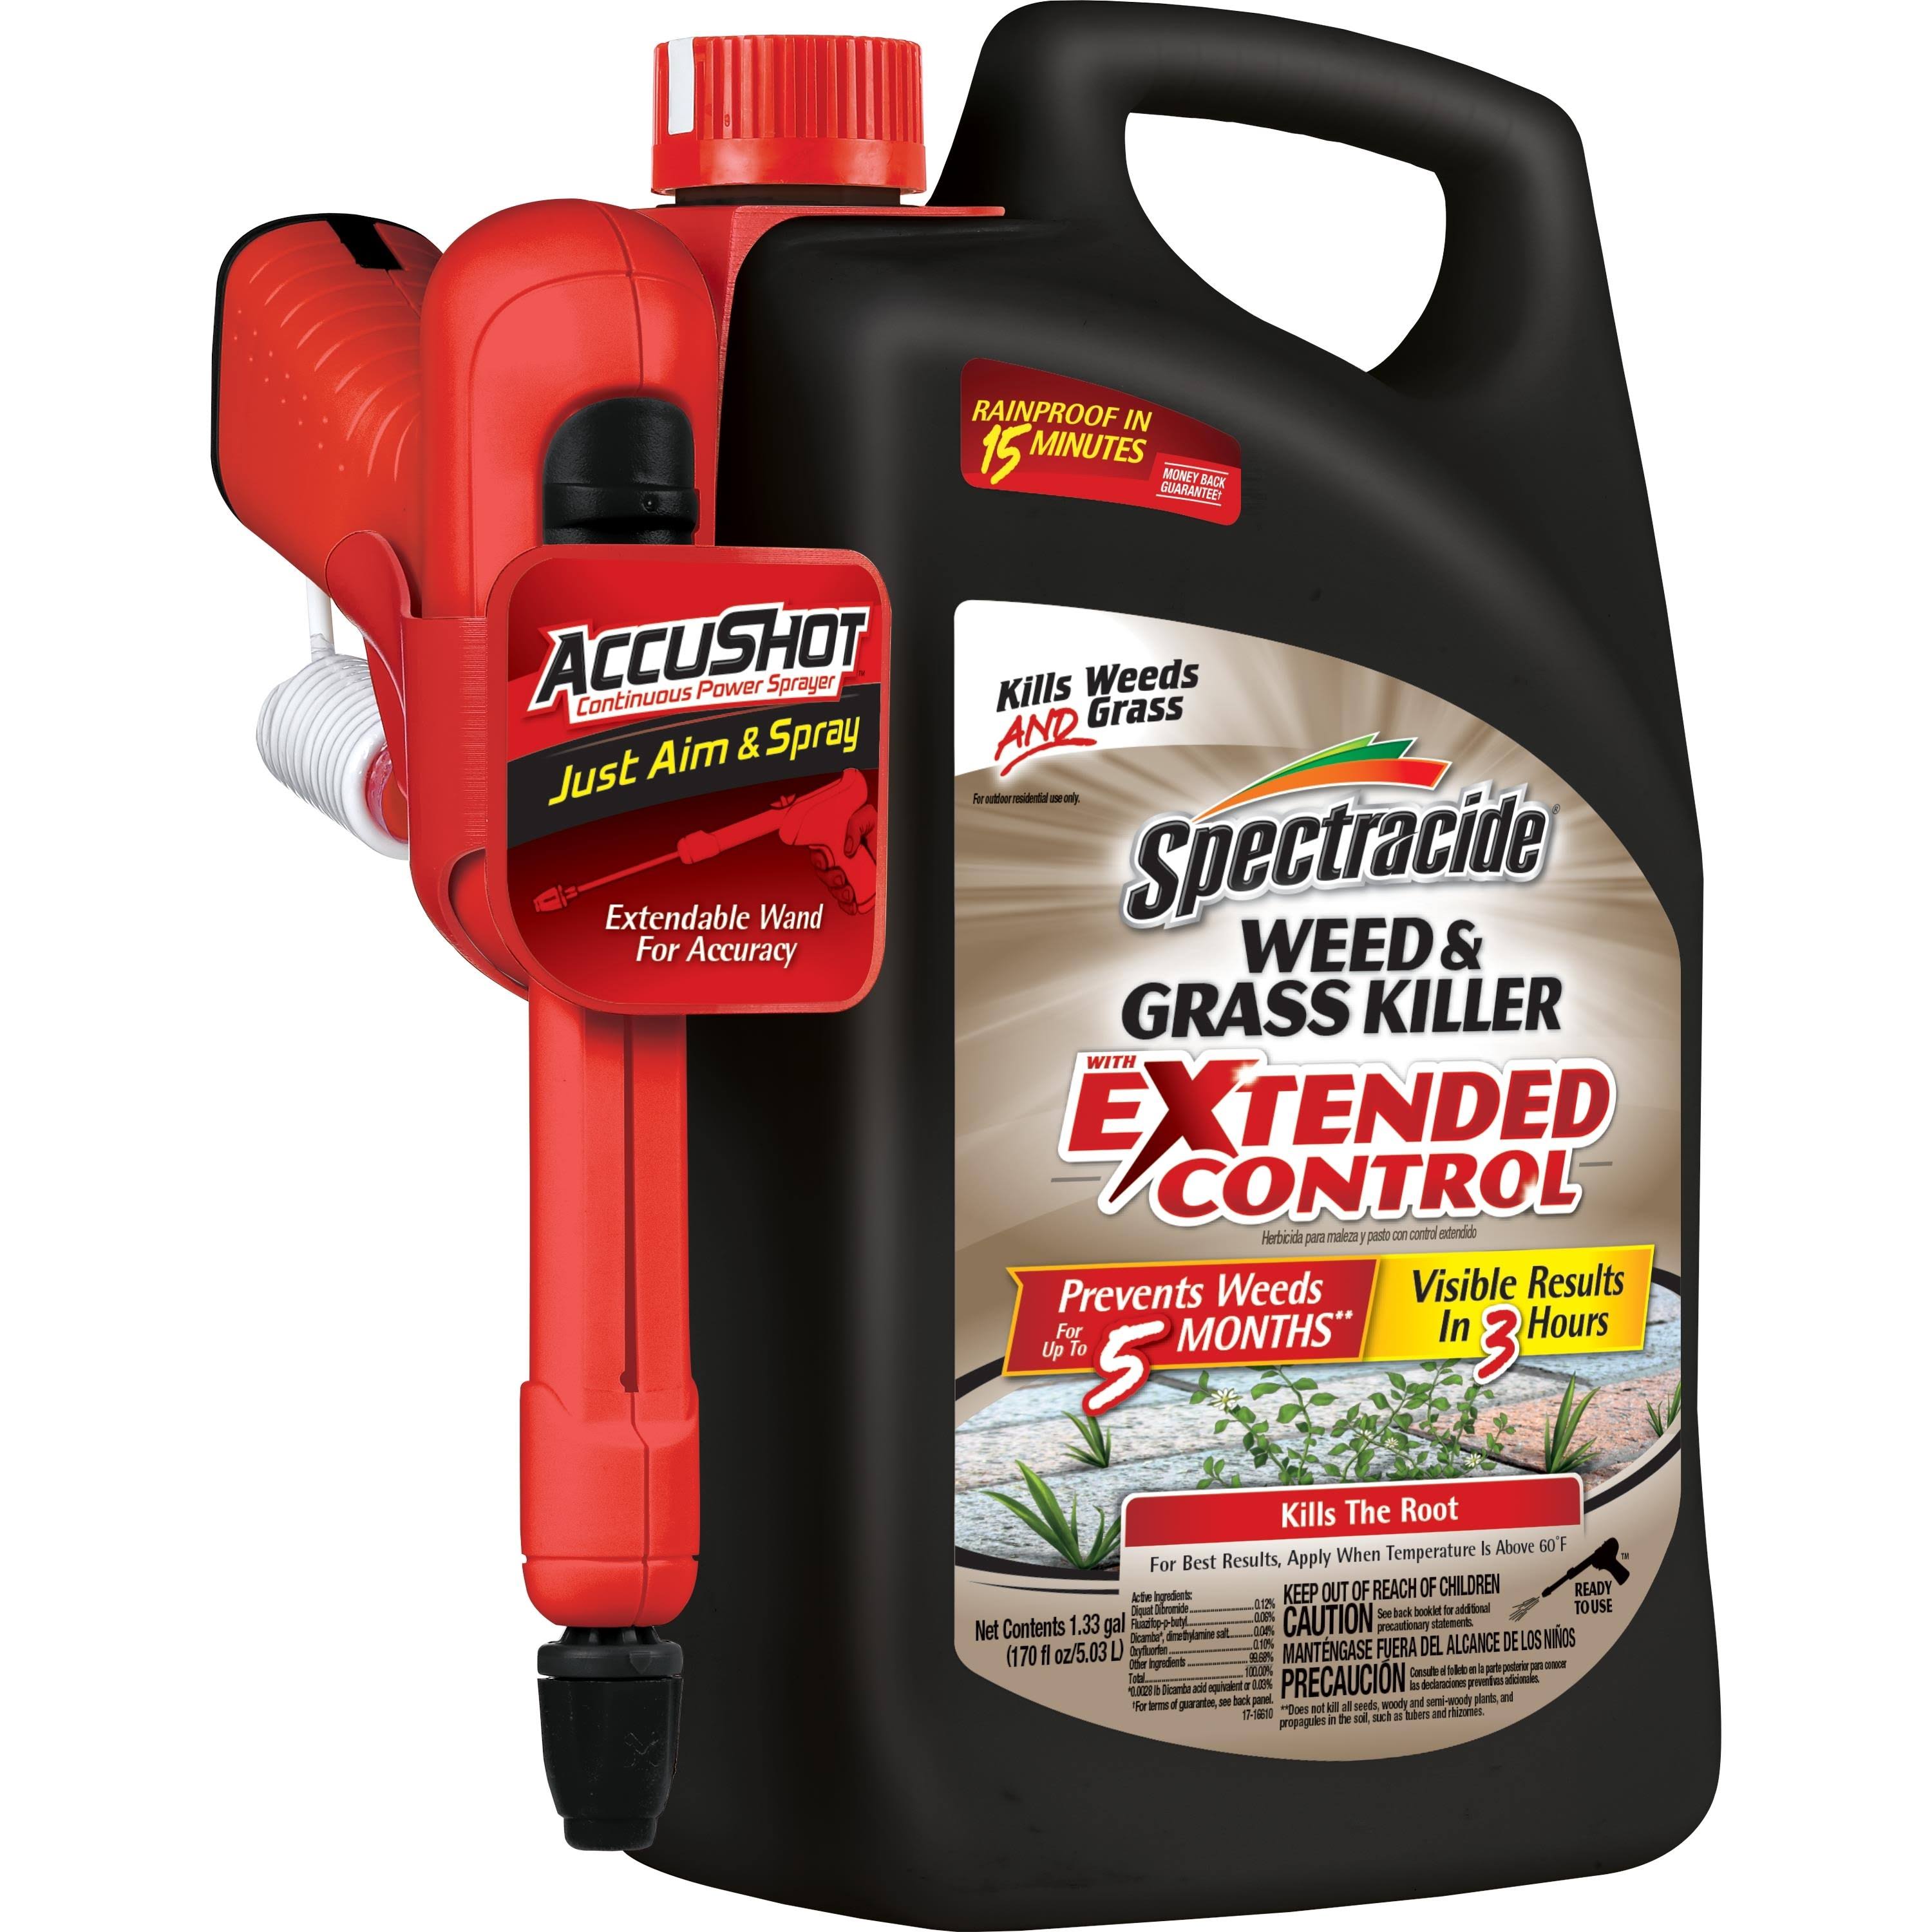 Spectracide Weed & Grass Killer With Extended Control - 1.3gal